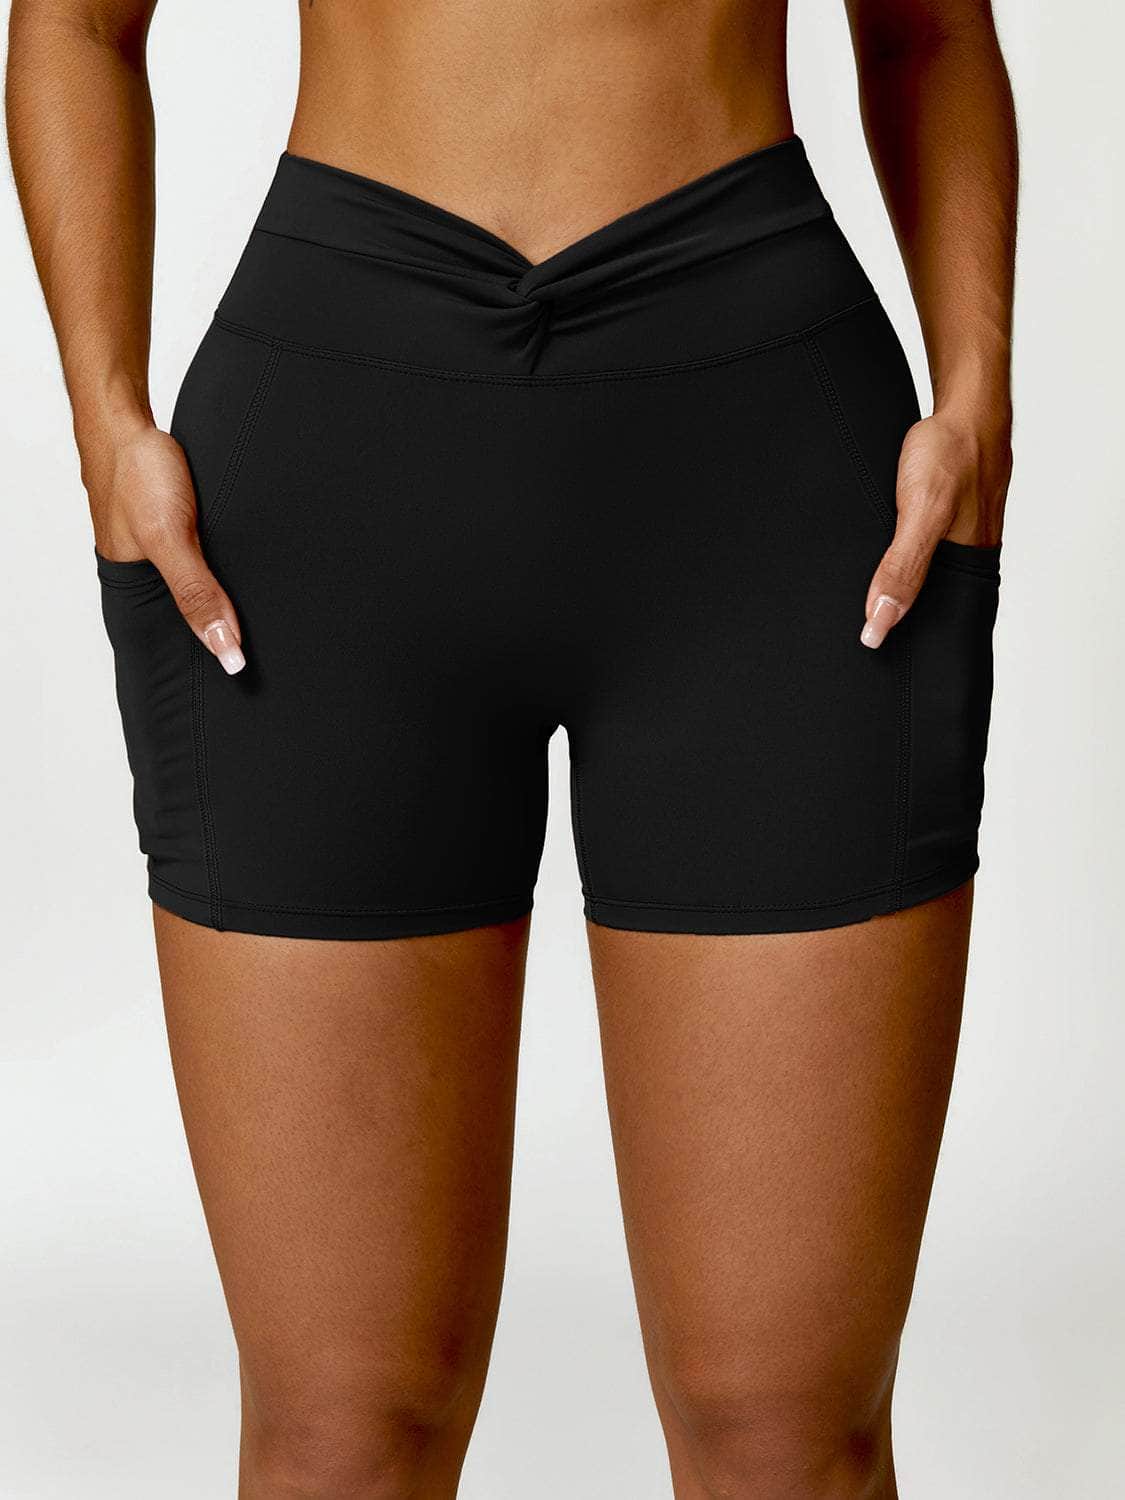 Twisted High Waist Active Shorts with Pockets Black / S